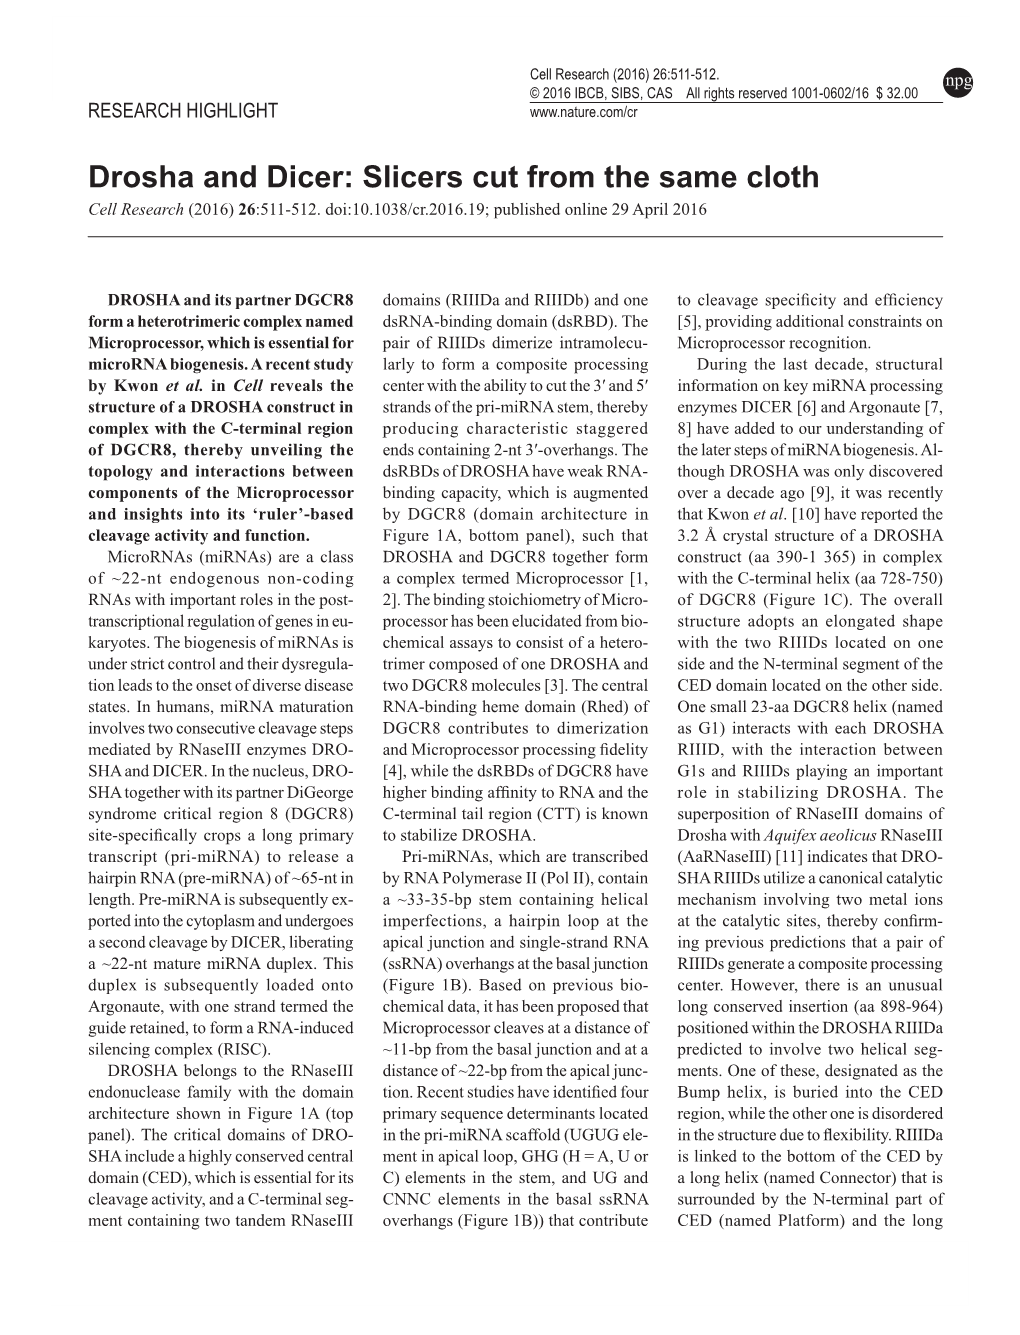 Drosha and Dicer: Slicers Cut from the Same Cloth Cell Research (2016) 26:511-512